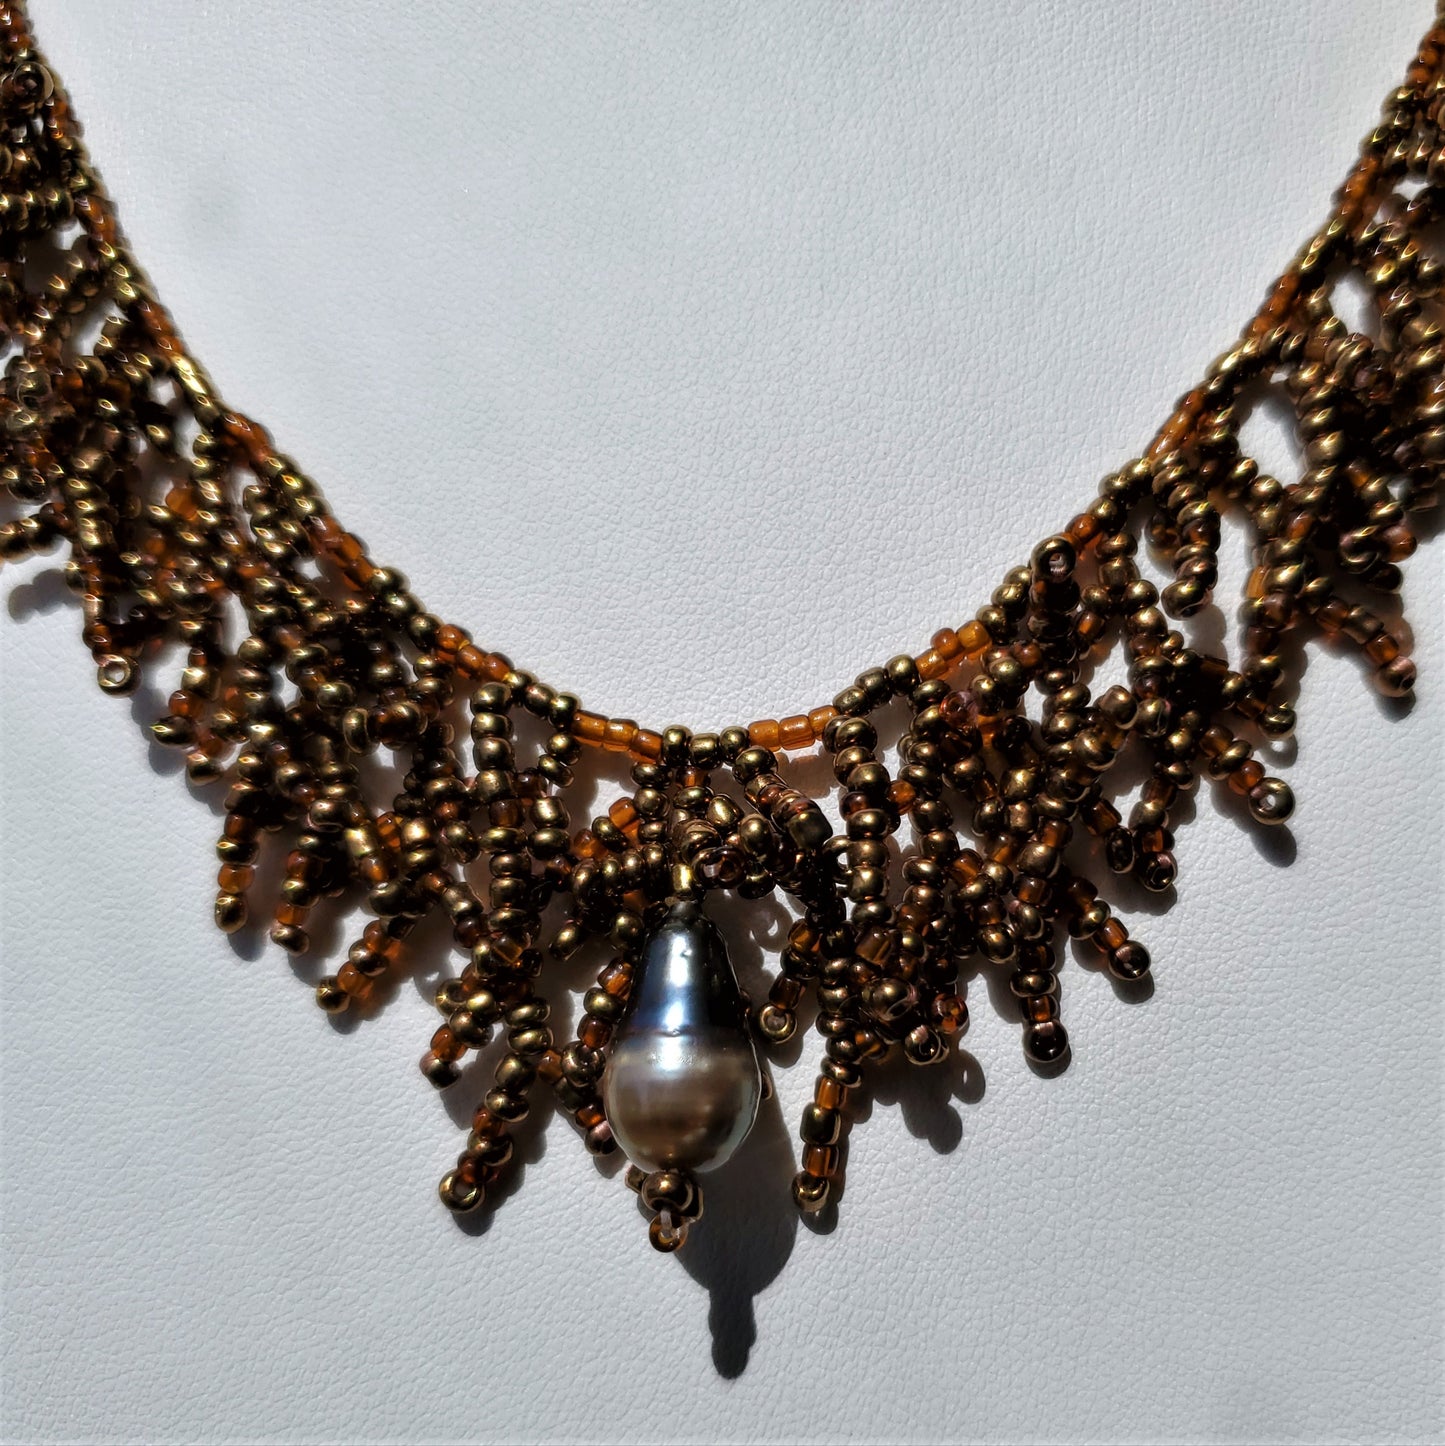 Tahitian Teardrop Keshi Pearl Necklace with Bronze Coral Beading